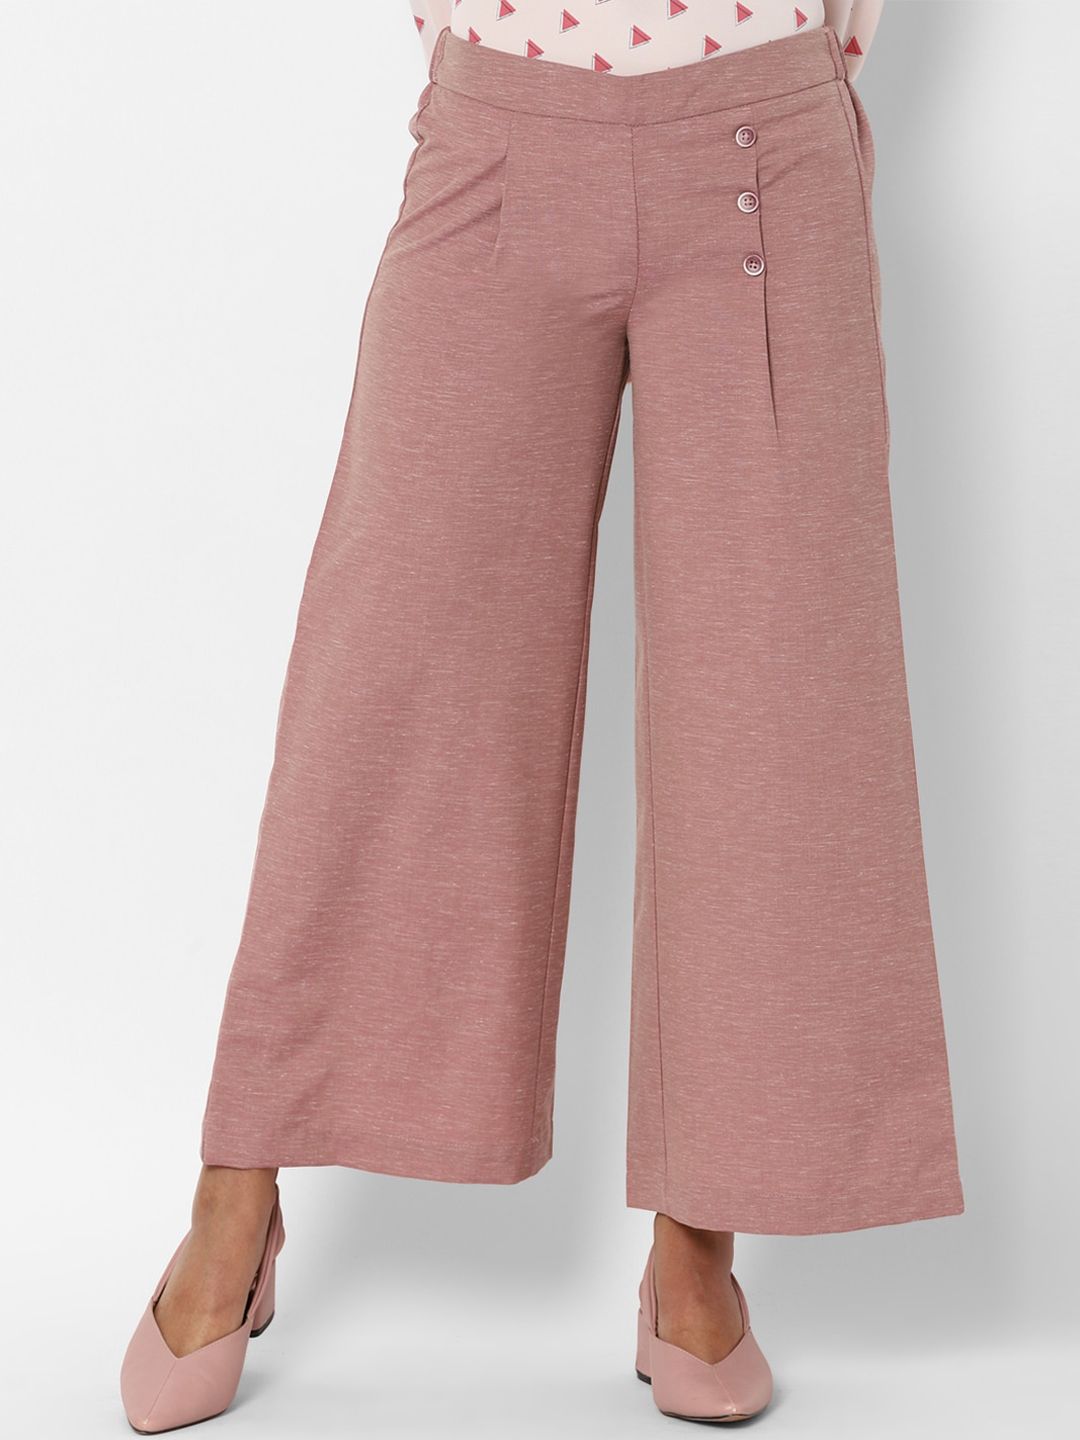 Allen Solly Woman Women Pink Flared Trousers Price in India